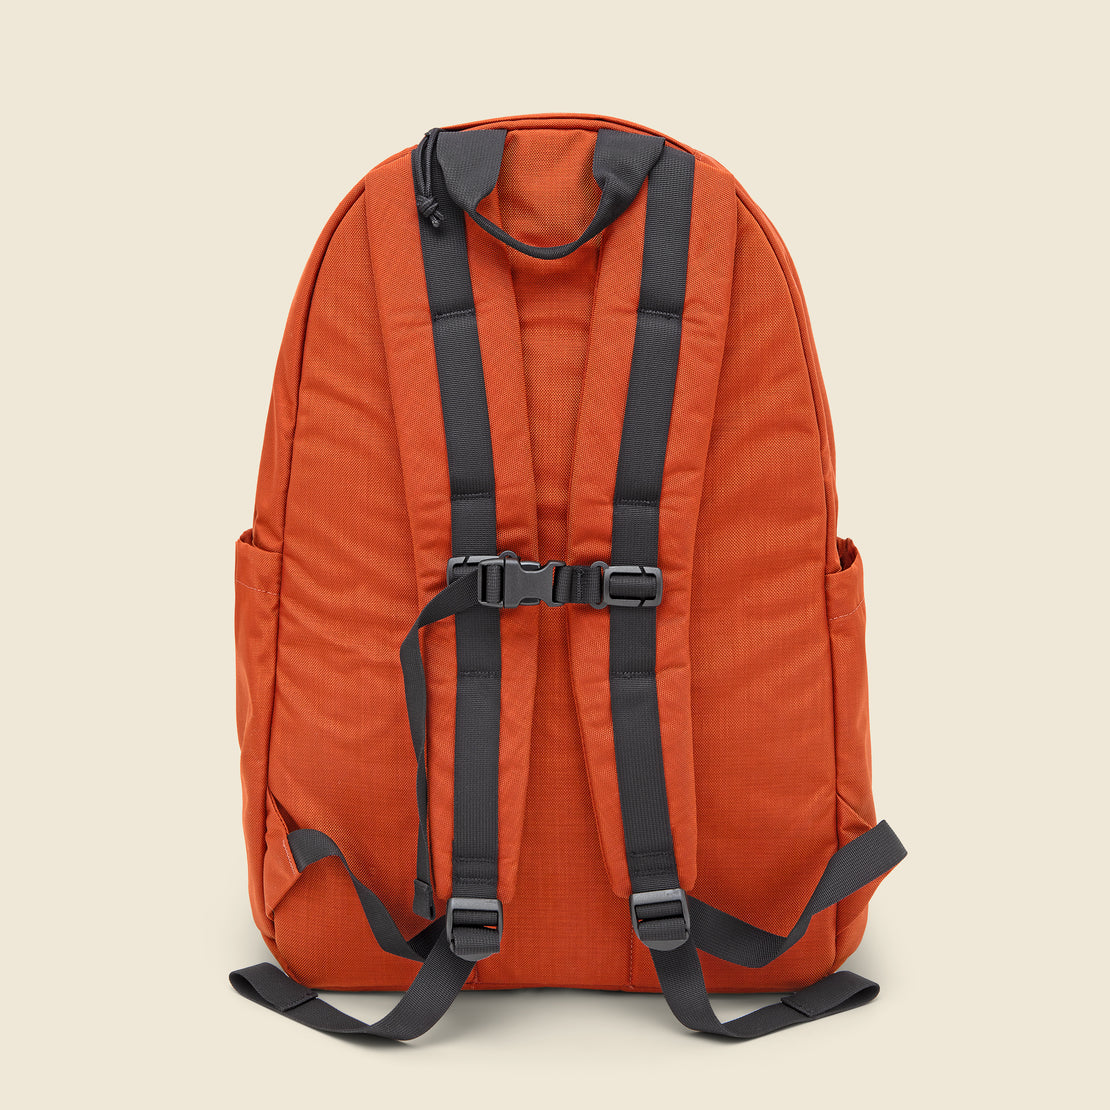 Day Pack - Orange - BEAMS+ - STAG Provisions - Accessories - Bags / Luggage